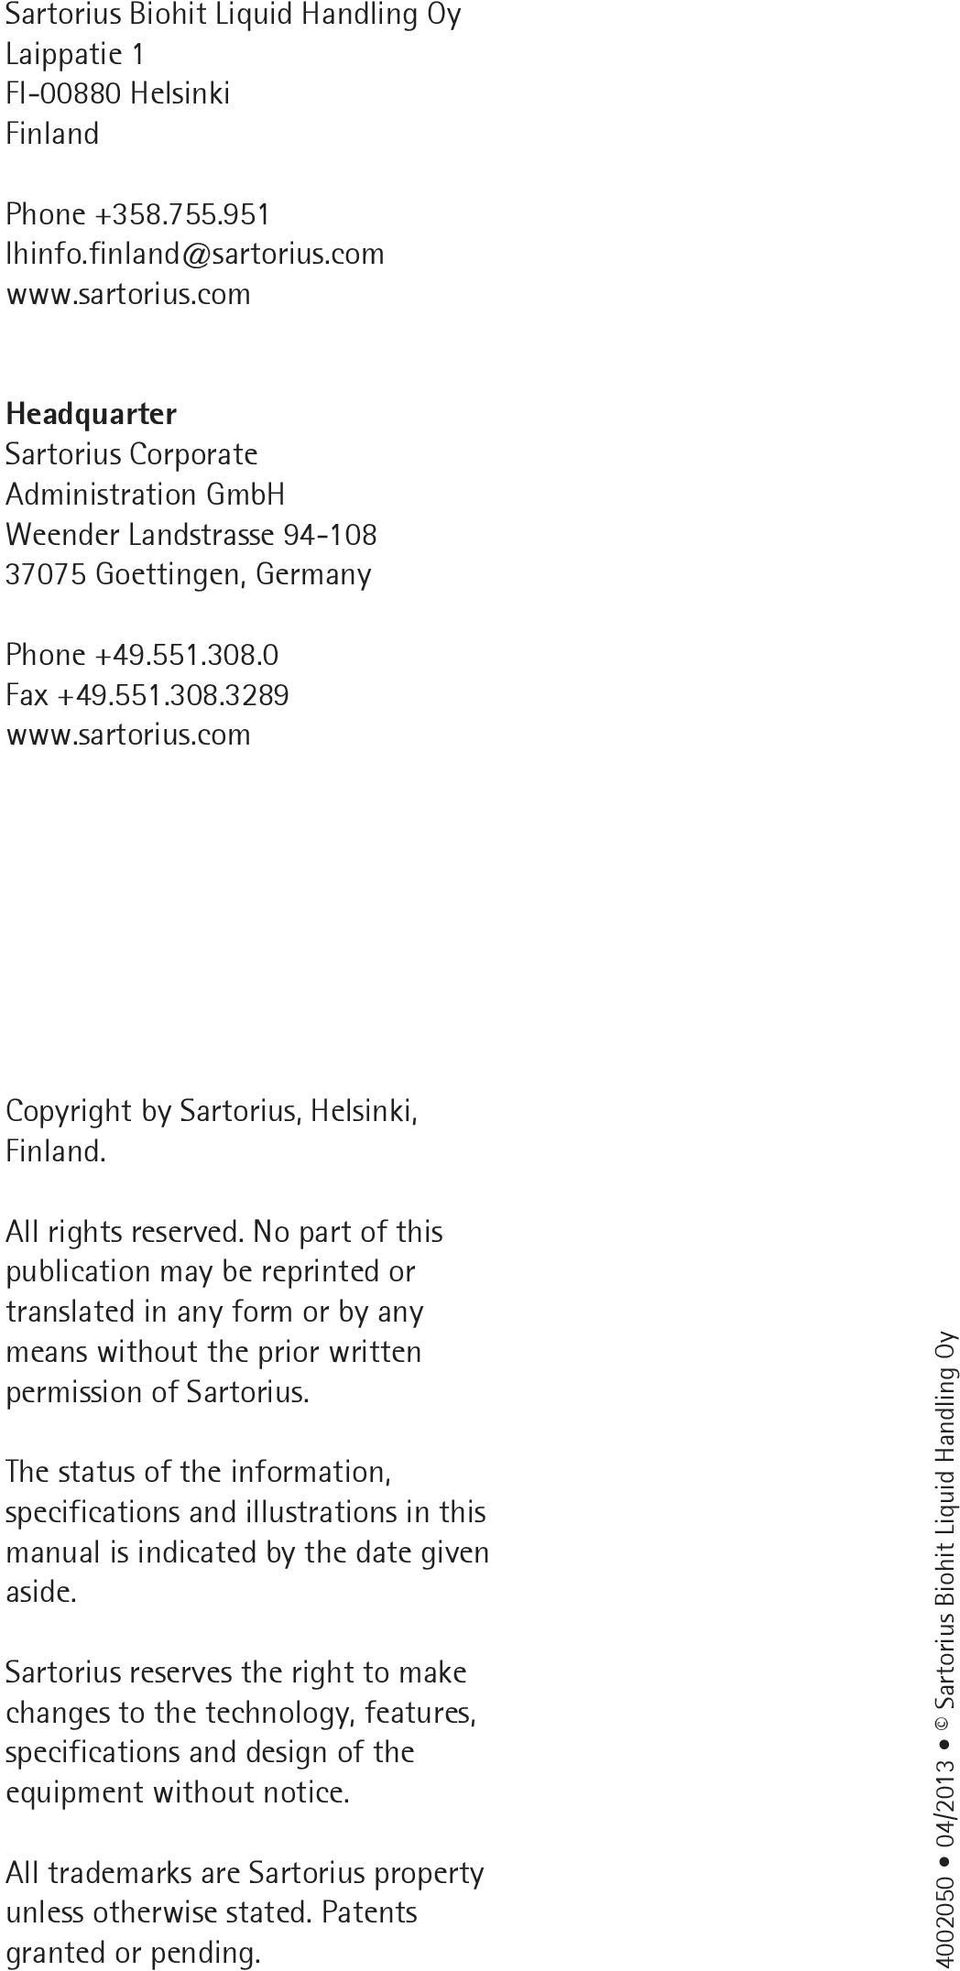 All rights reserved. No part of this publication may be reprinted or translated in any form or by any means without the prior written permission of Sartorius.